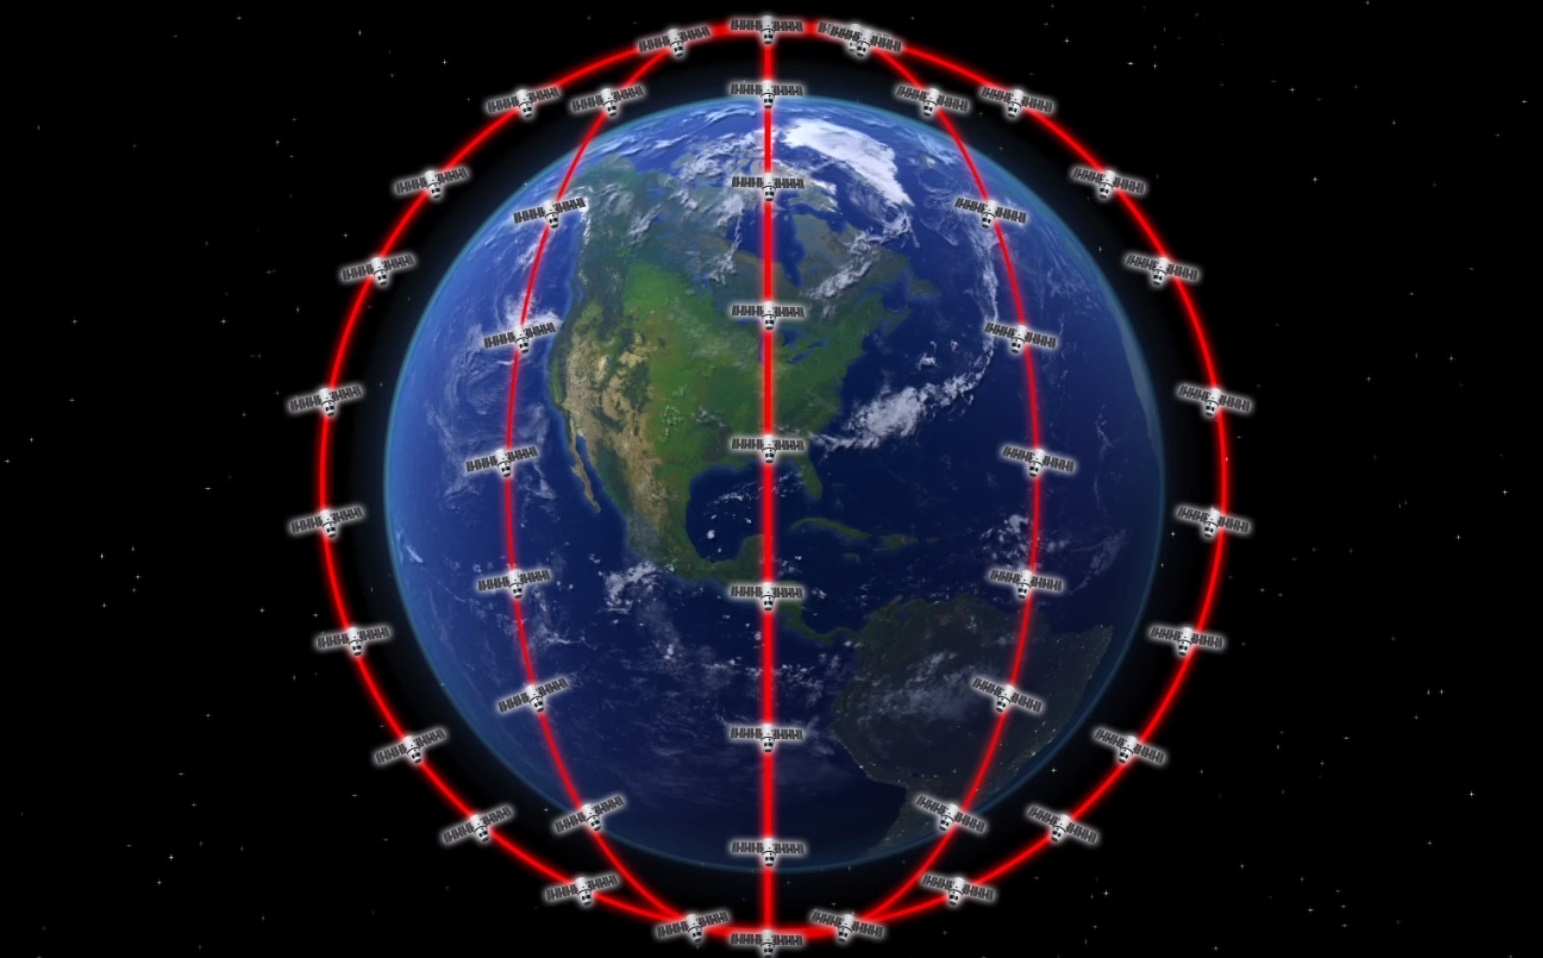 tesla-might-use-spacex-s-satellite-constellation-for-car-internet-connectivity-123502_1.jpg